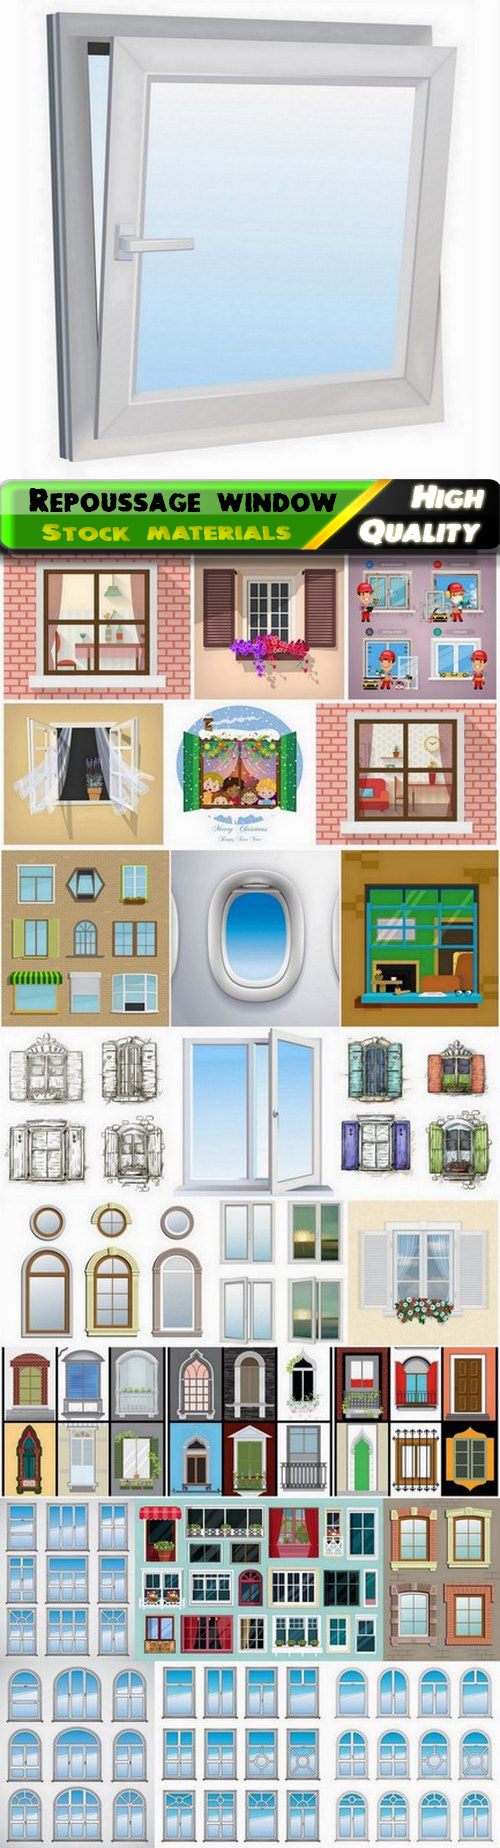 Repoussage window for house with original design - 25 Eps